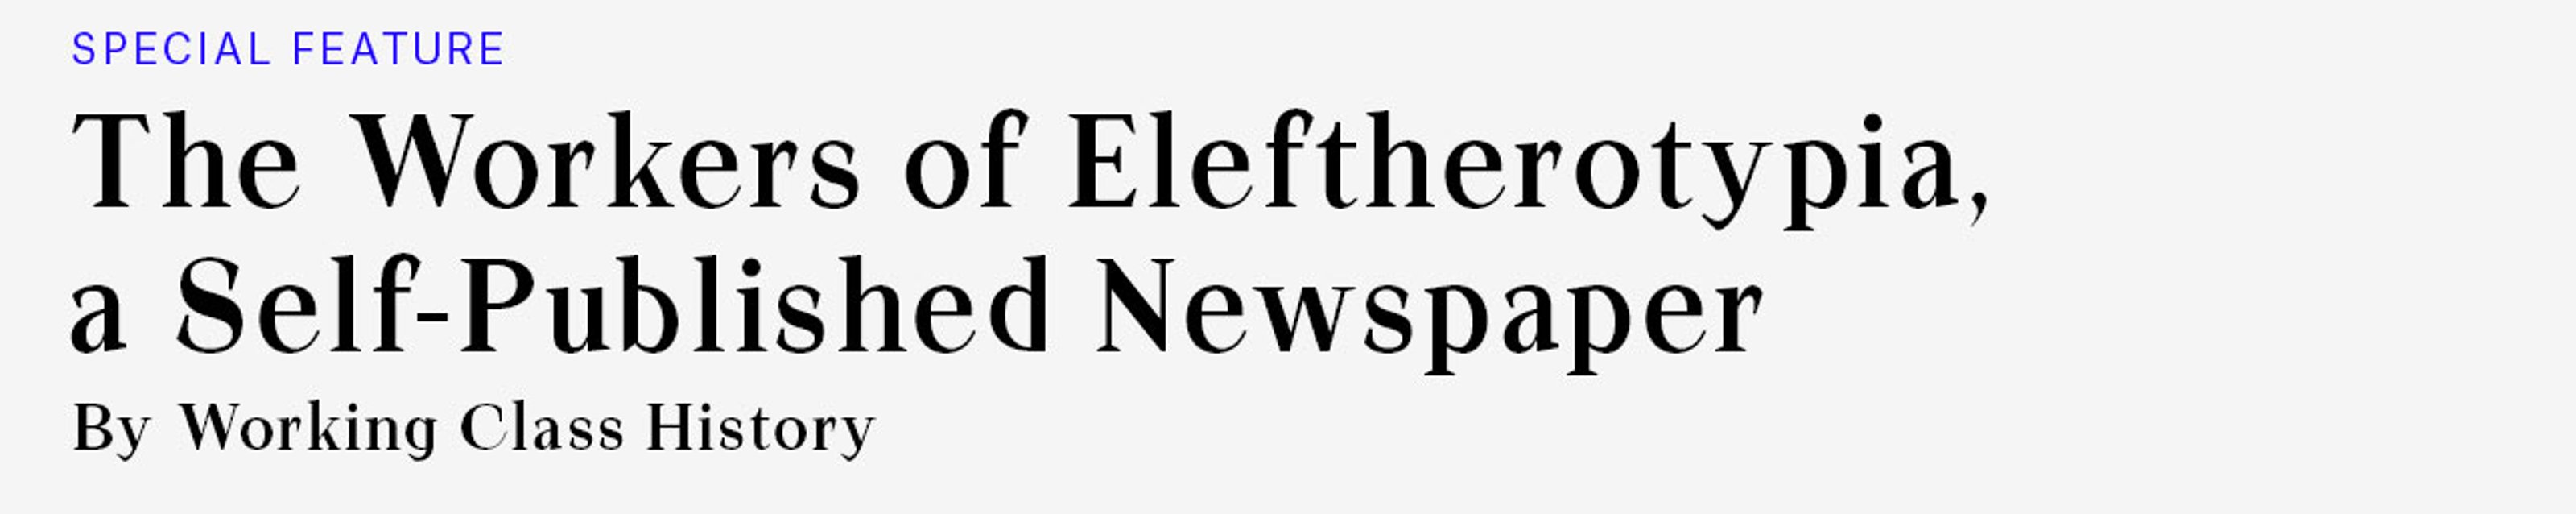 Special Feature: Workers of Elefterotypia, a Self Published Newspaper, by Working Class History